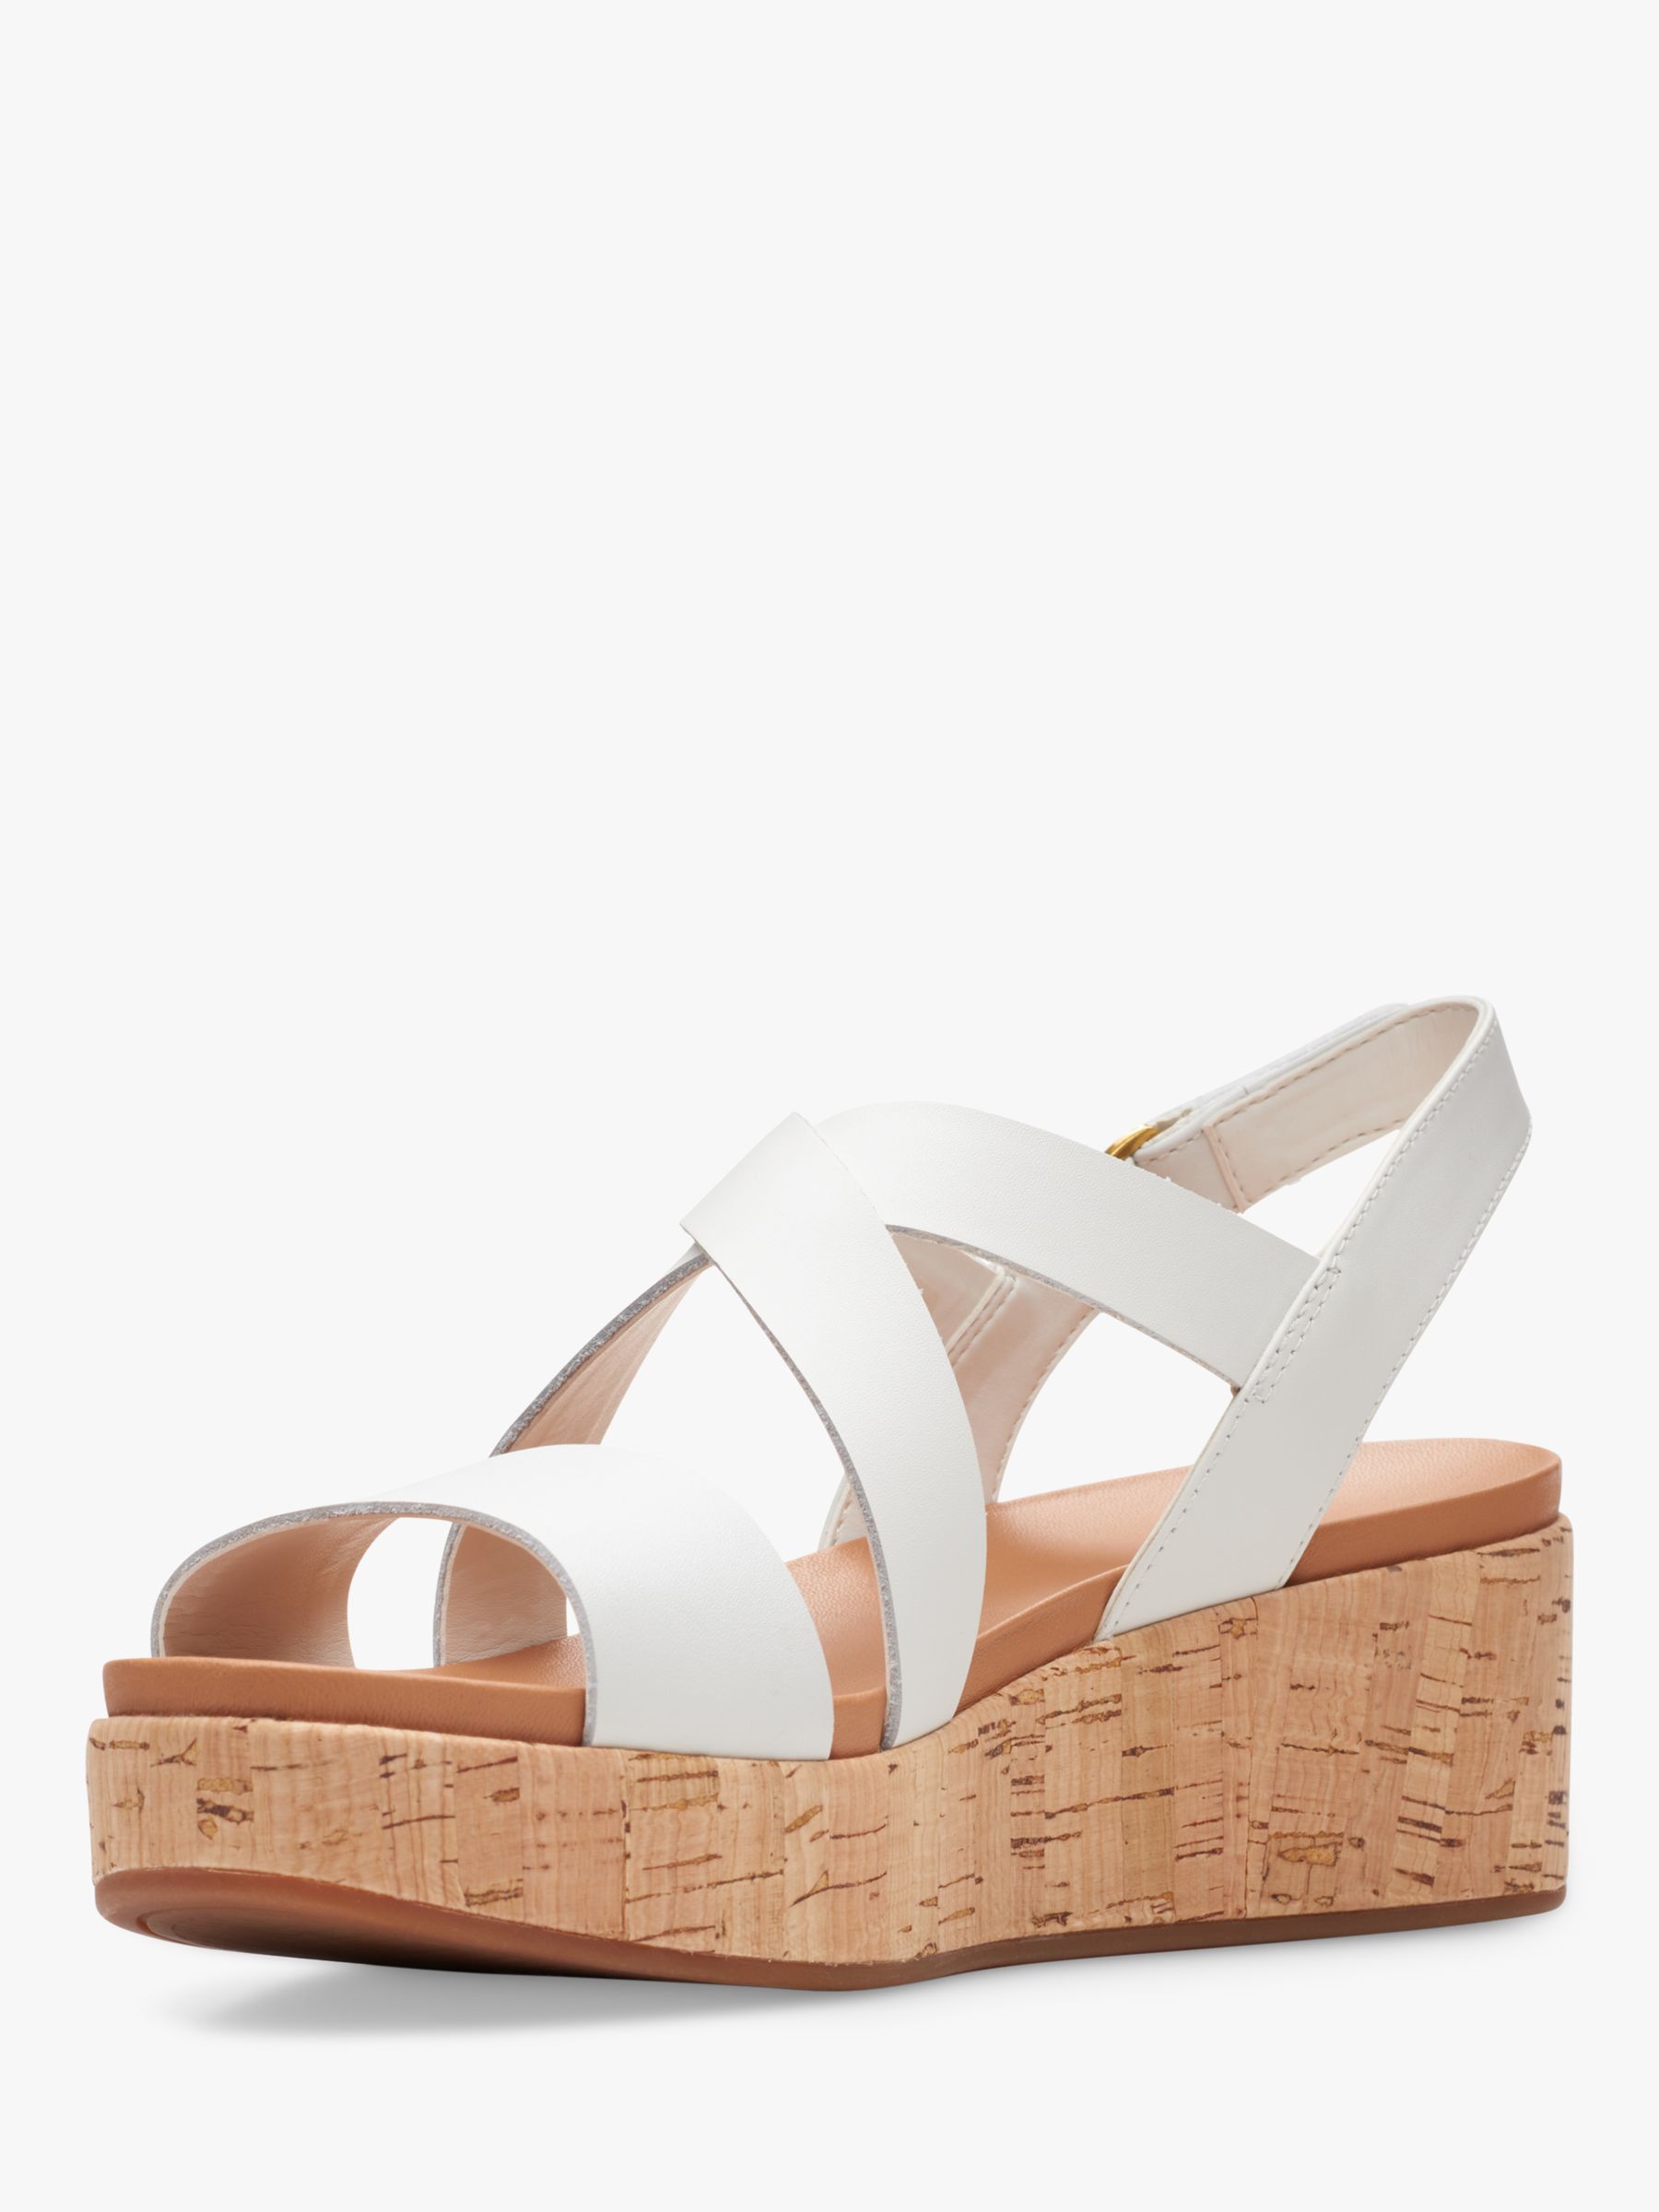 Clarks Kimmei Cork Leather Wedge Sandals, White at John Lewis & Partners